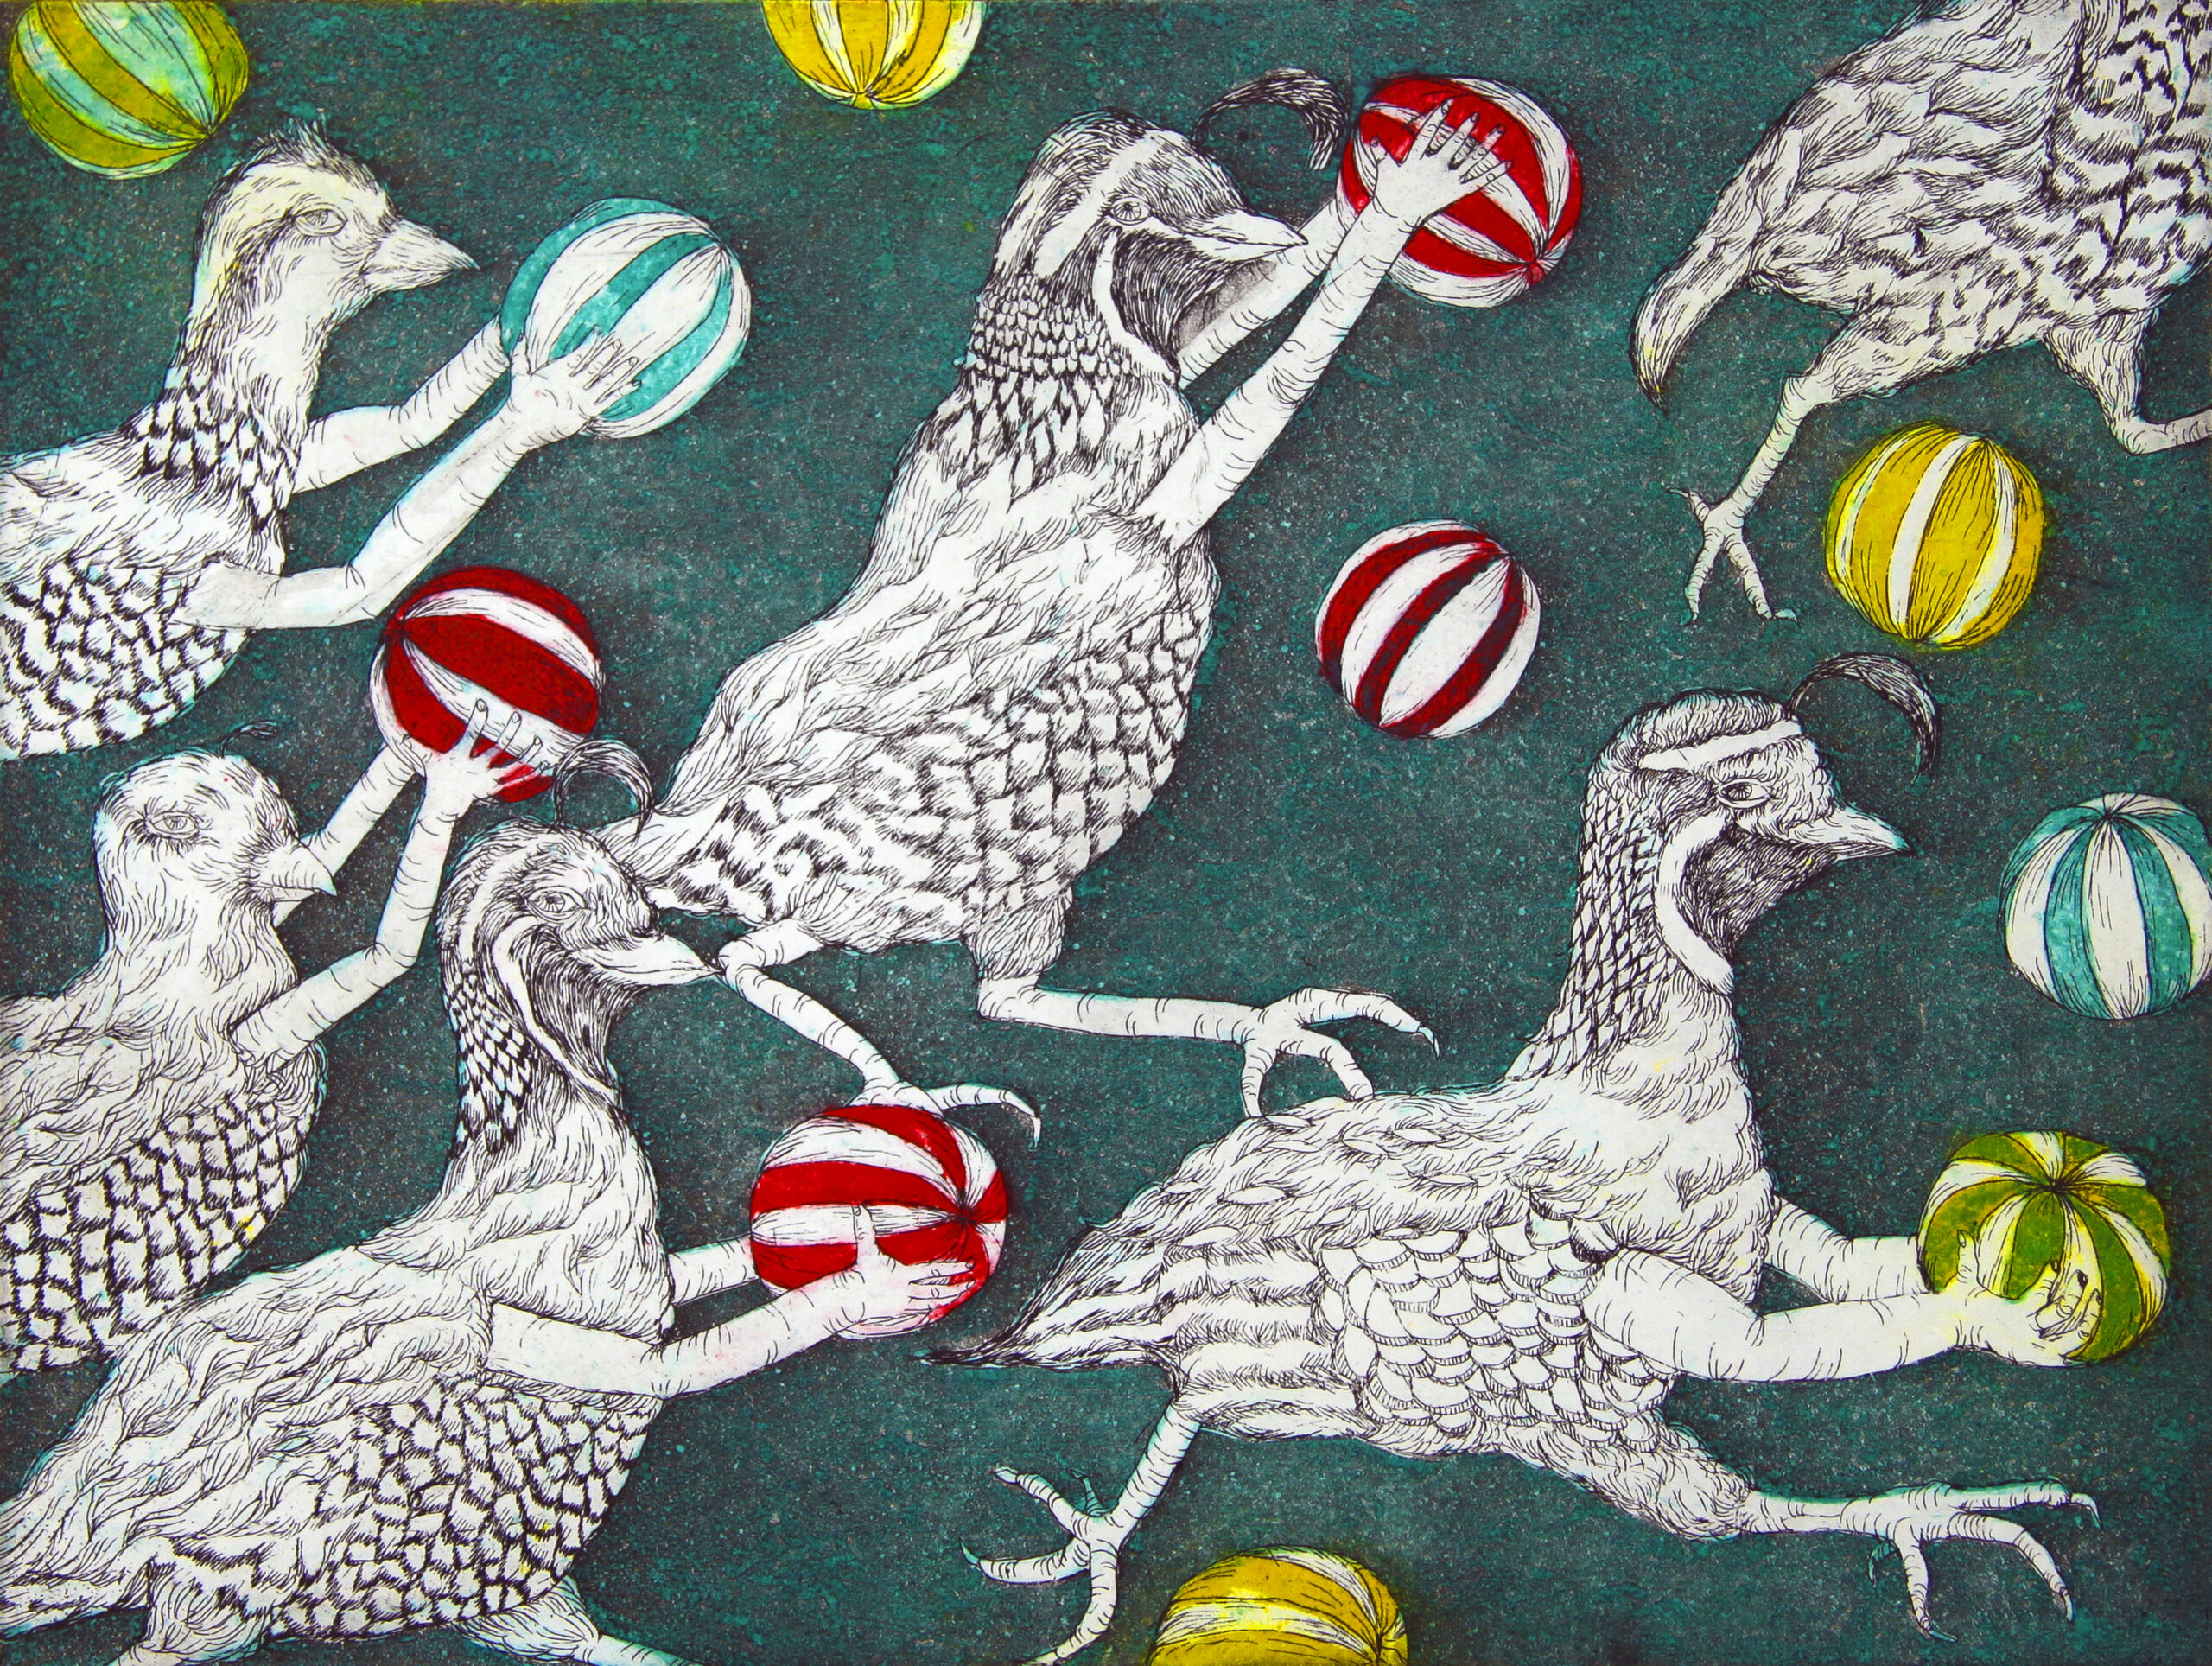 A copperplate etching featuring anthropomorphic quails running with colorfully striped beachballs on a teal background. The background is colored by aquatint and the beachball stripes are colored with chine-colle.